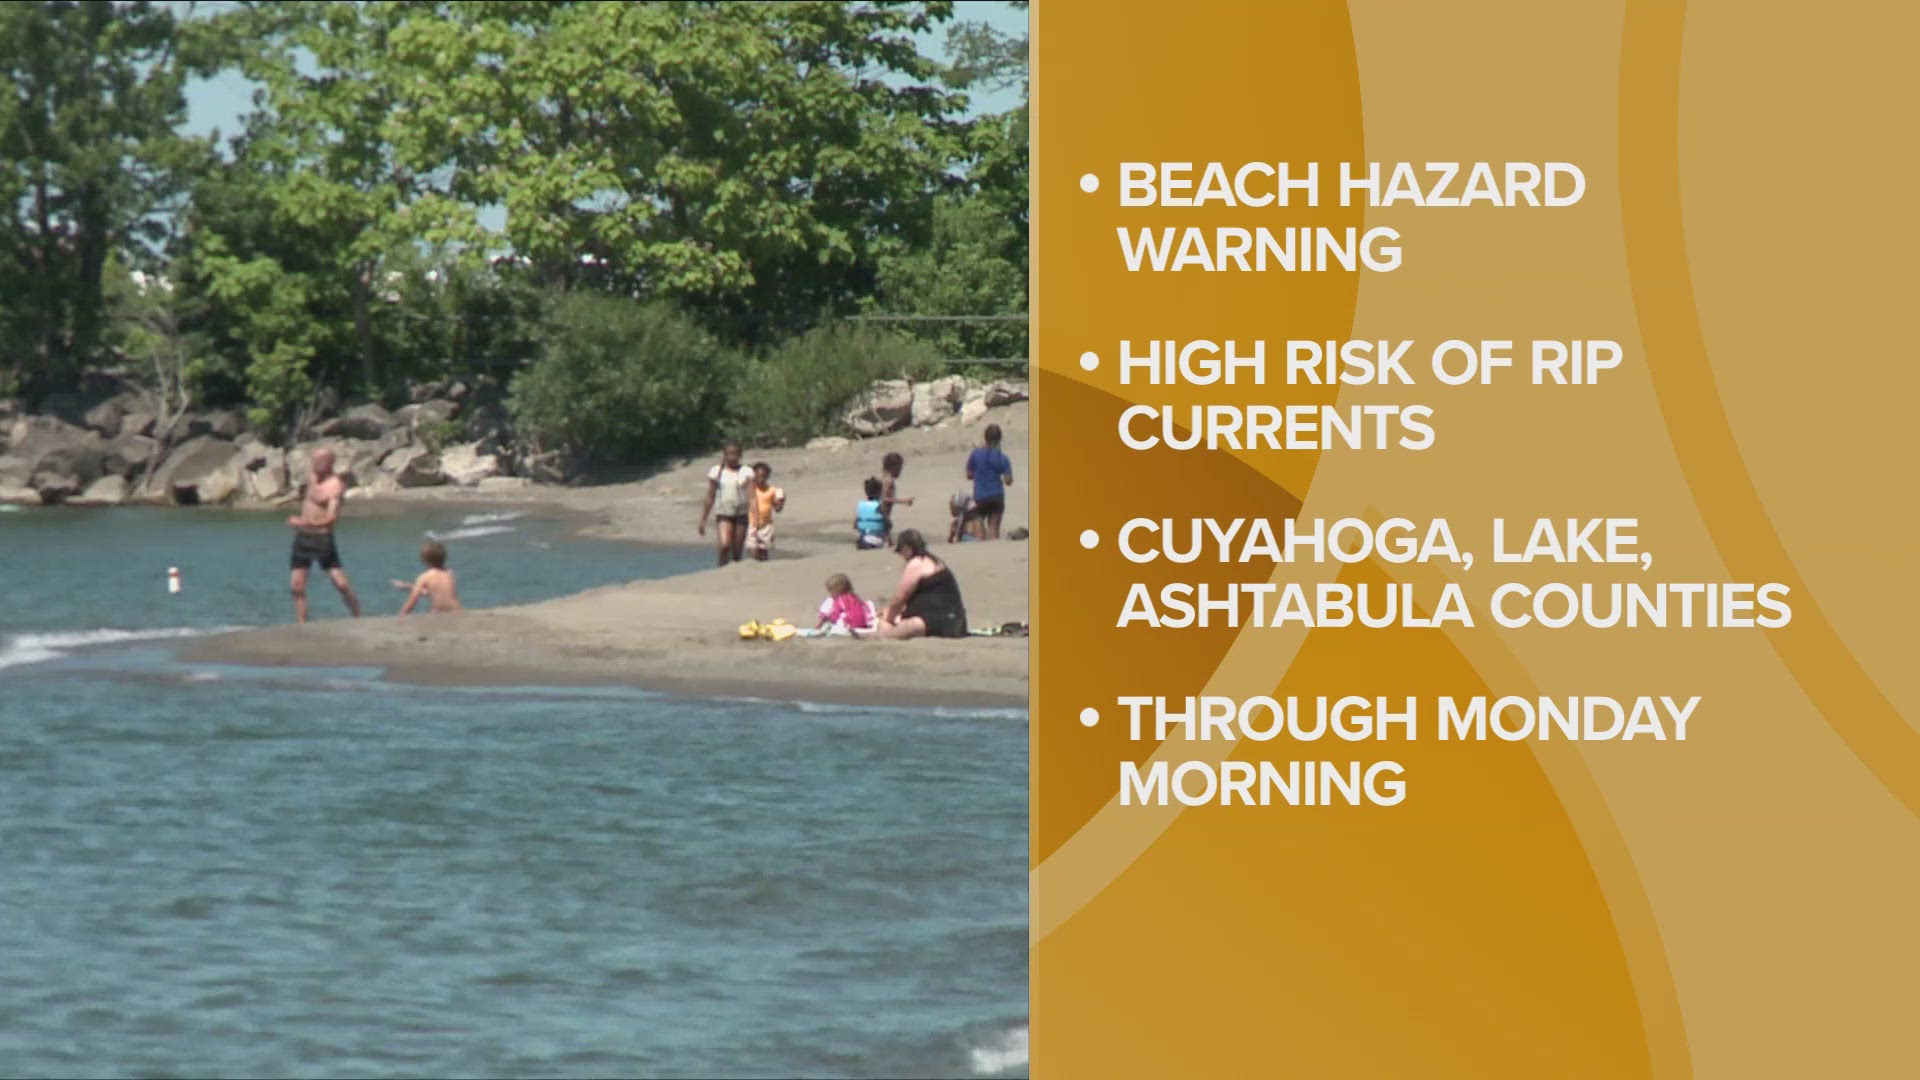 The NWS issued a Beach Hazards Statement through Monday morning as a "high risk of rip currents" is expected.